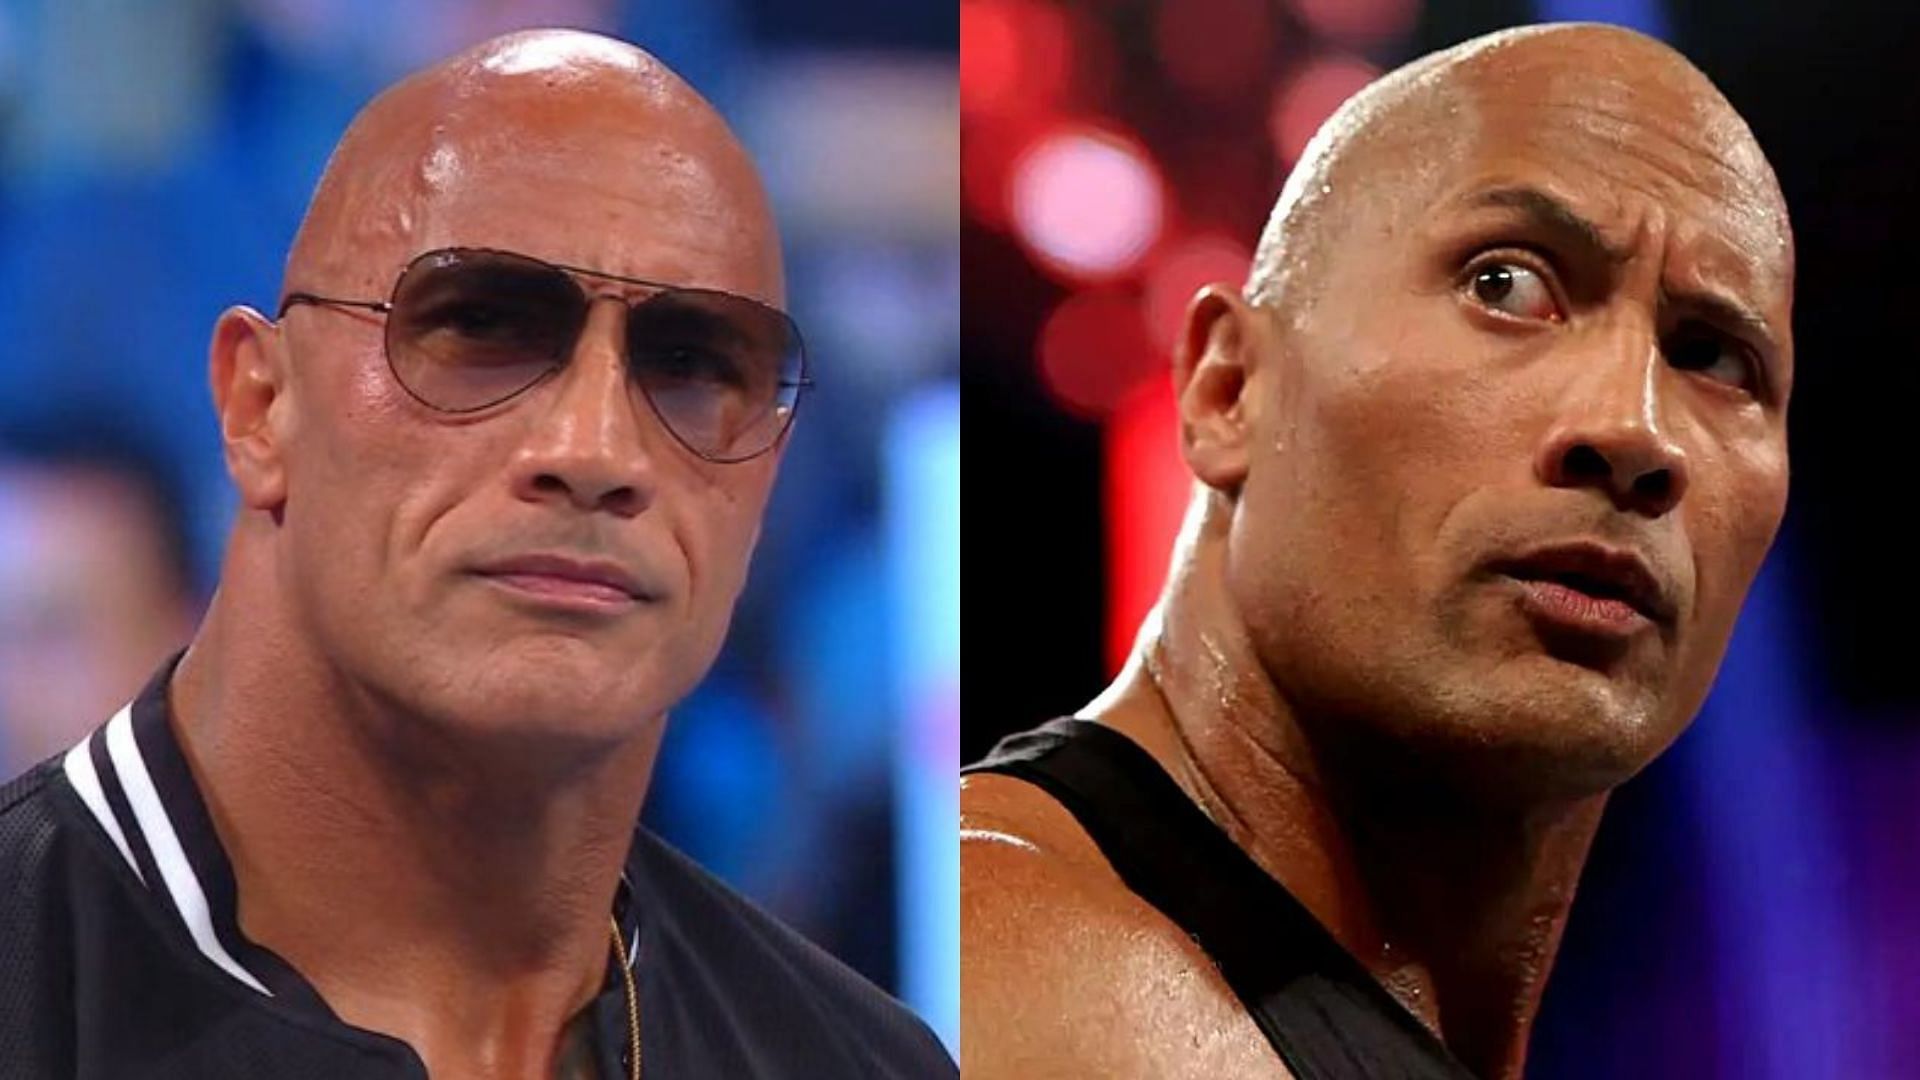 WWE news: The Rock had a three-man shortlist of superstars he wanted to face  if he came back to WWE back in 2008